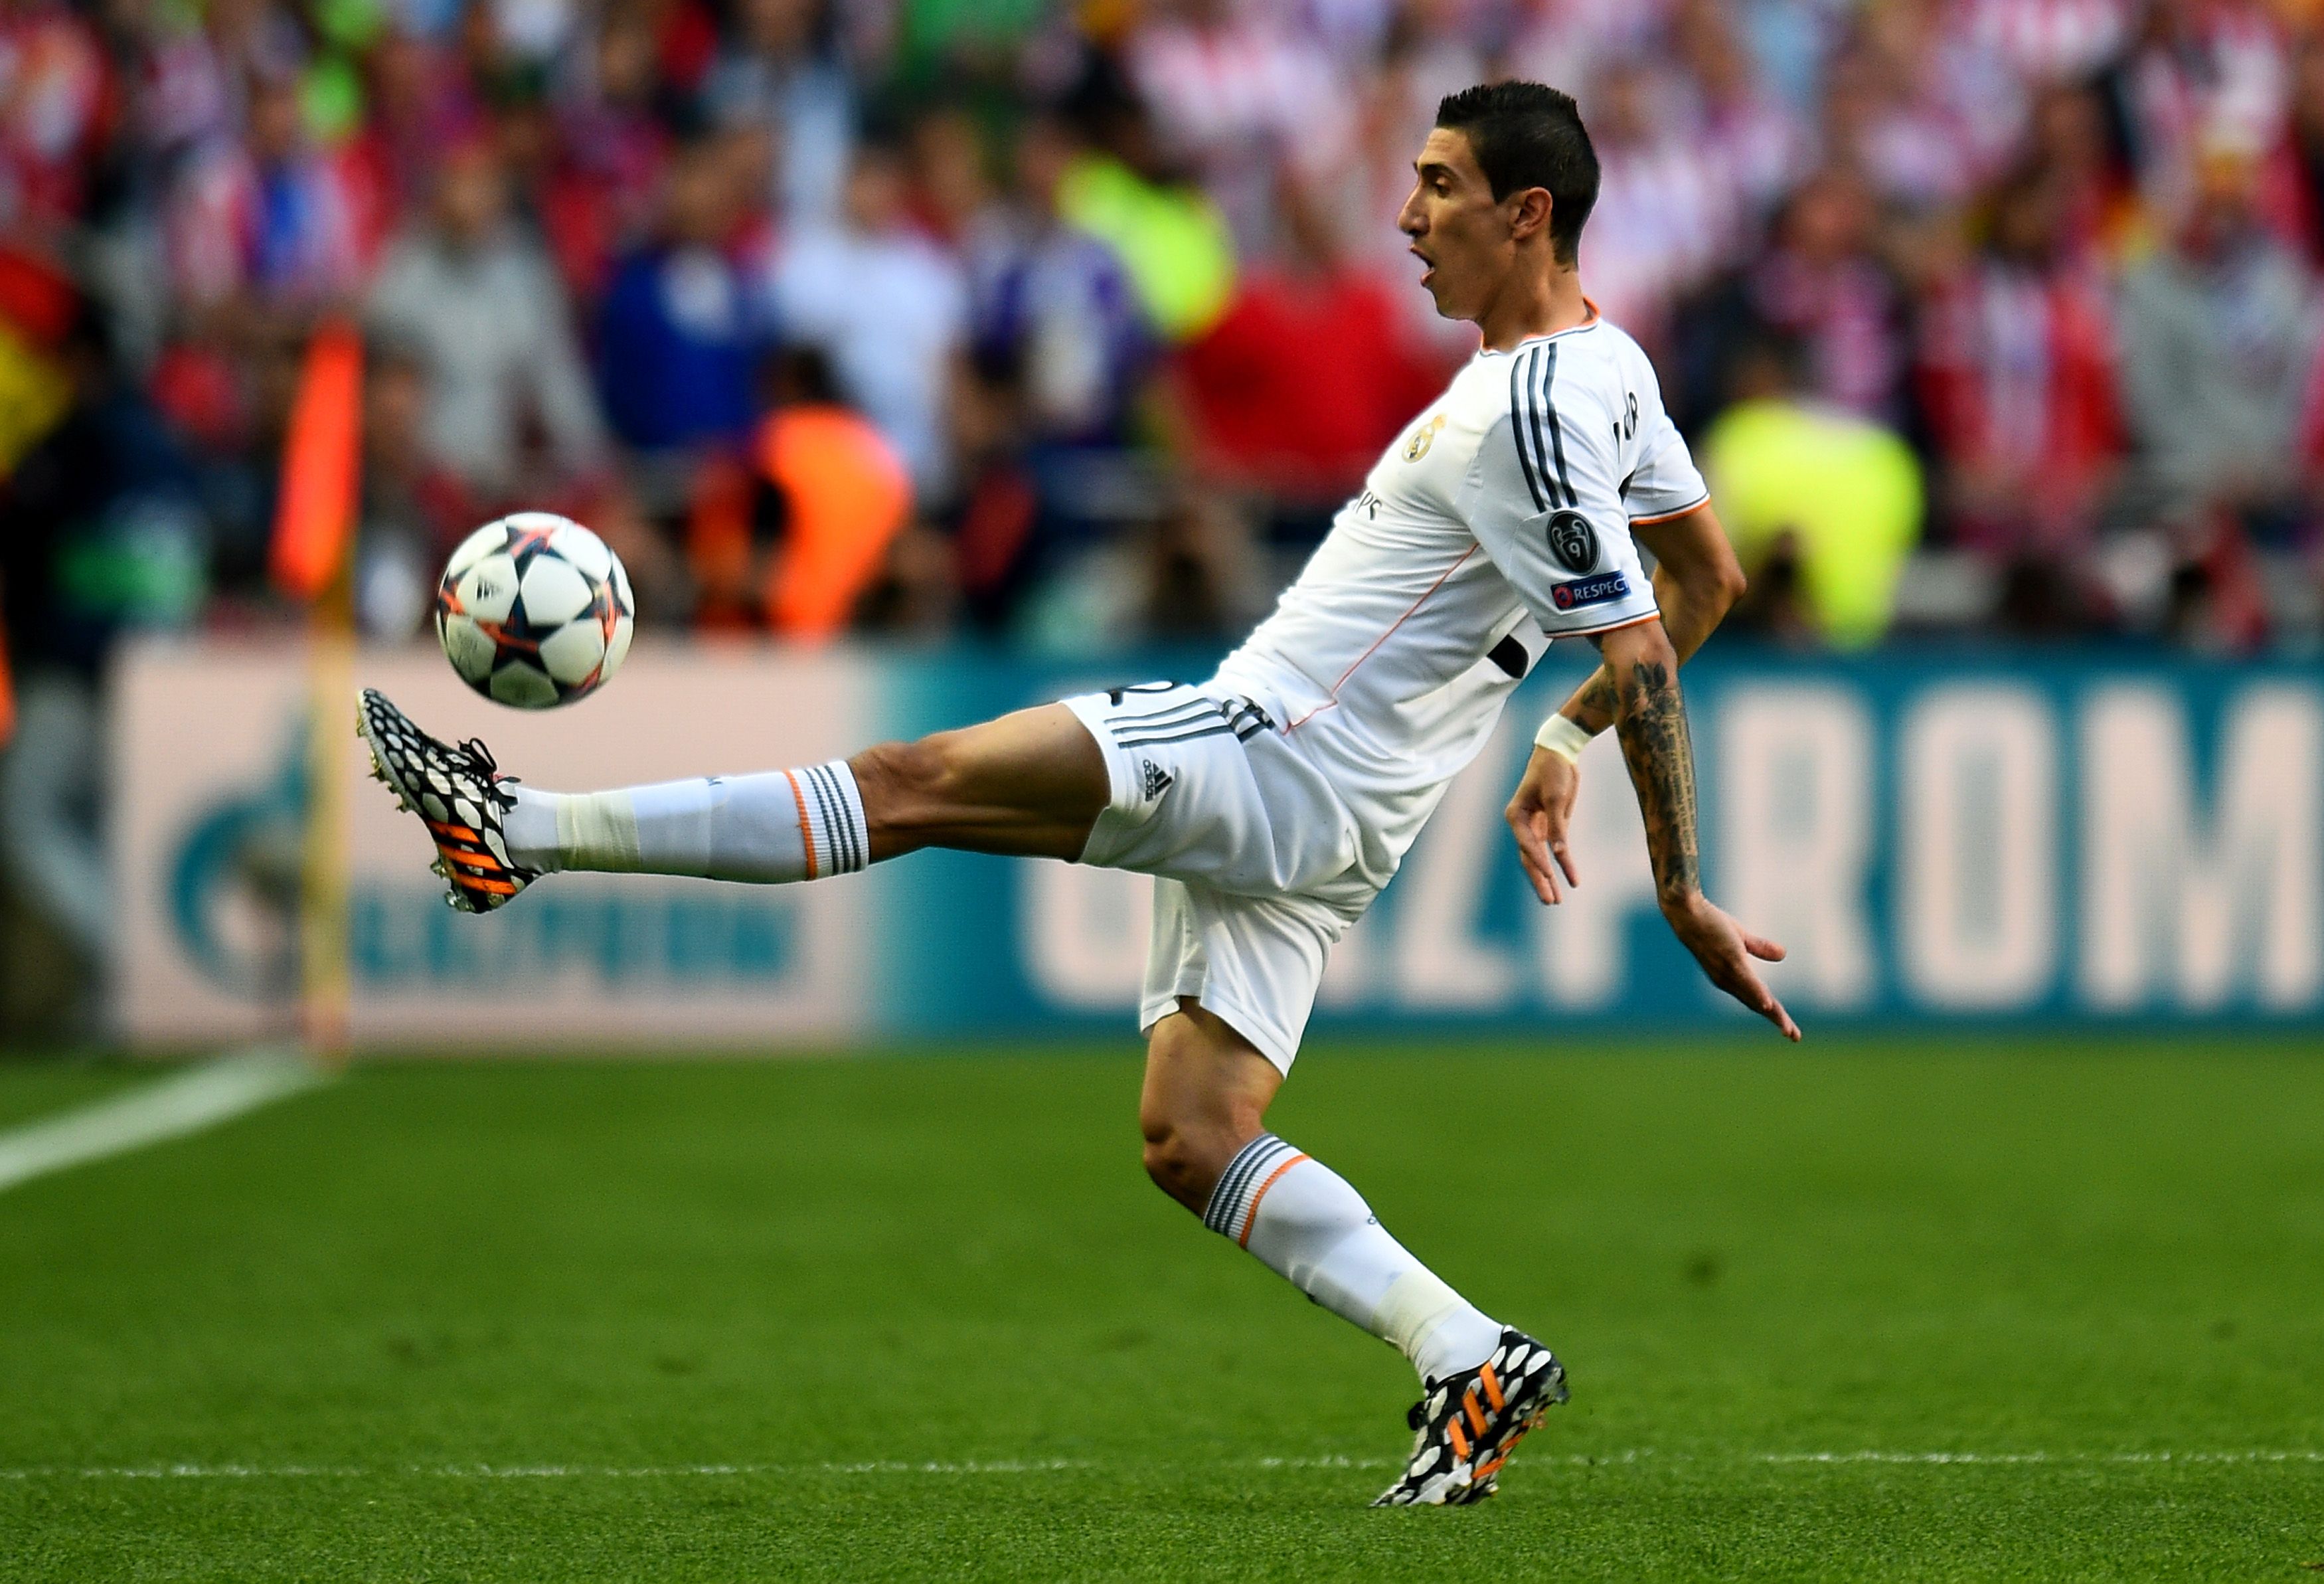 Di Maria brings a ball down with his left foot